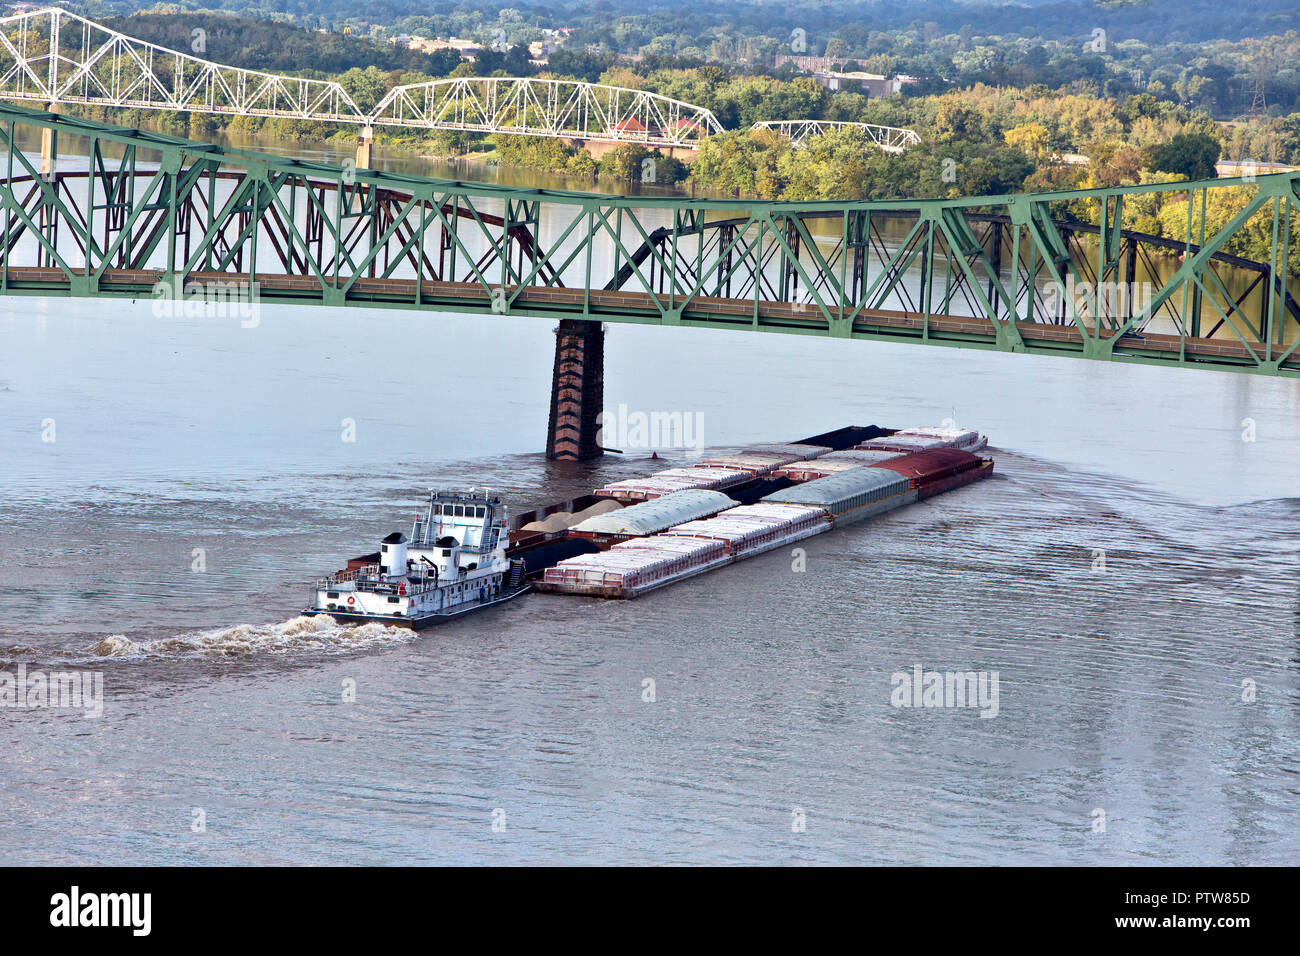 Tugboat 'Allen P. Hall' pushing barges loaded with various covered products including coal, Parkersburg-Belpre cantilever bridge, Ohio River. Stock Photo